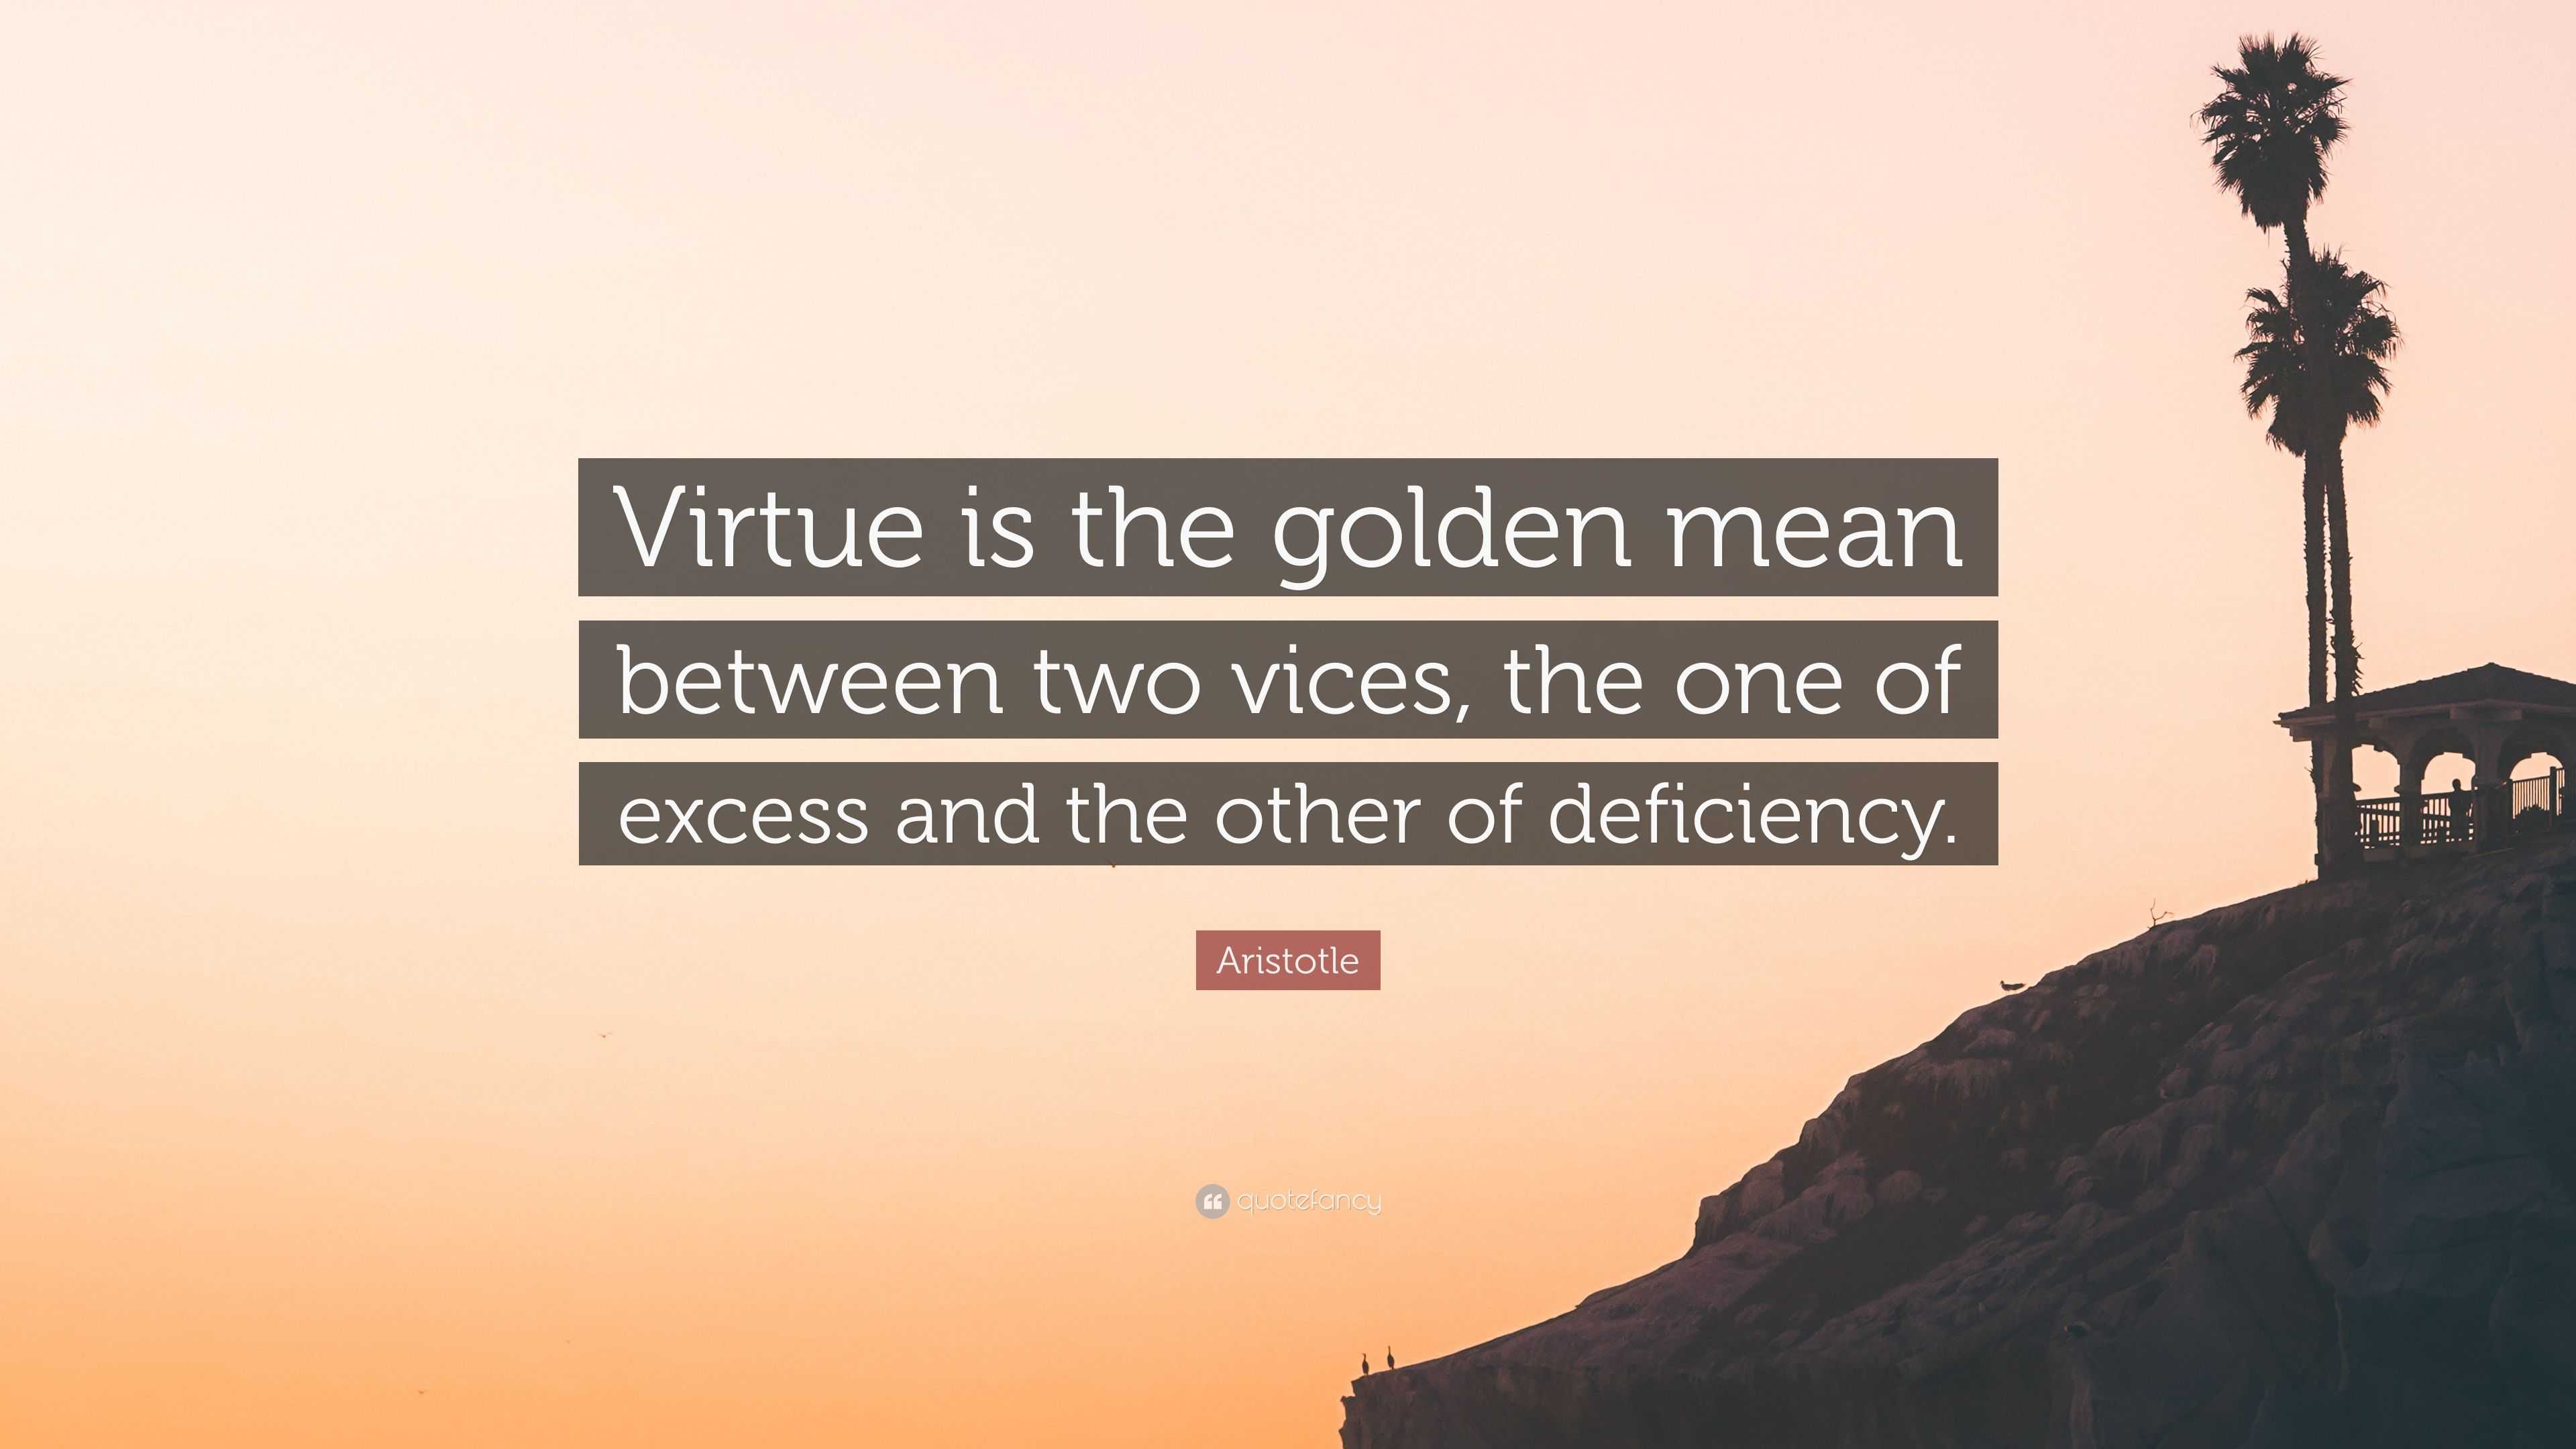 Aristotle Quote: “Virtue is the golden mean between two vices, the one